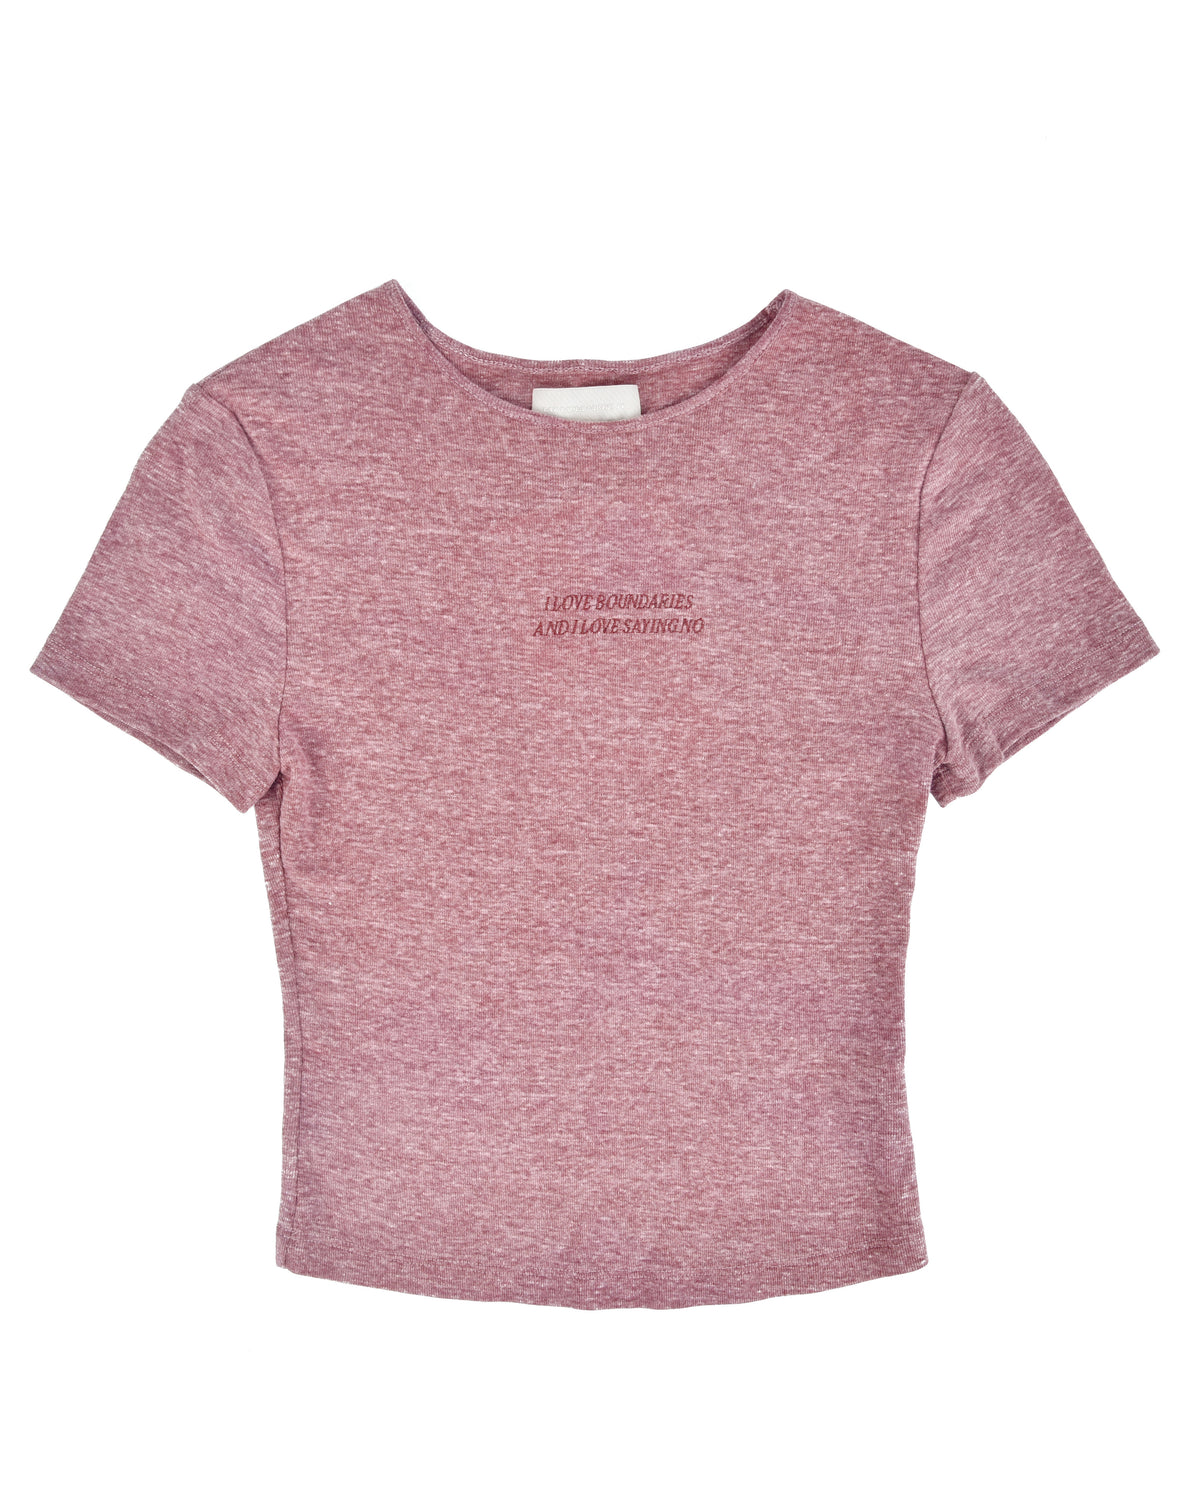 Boundaries Recycled Cotton Baby Tee - Cranberry